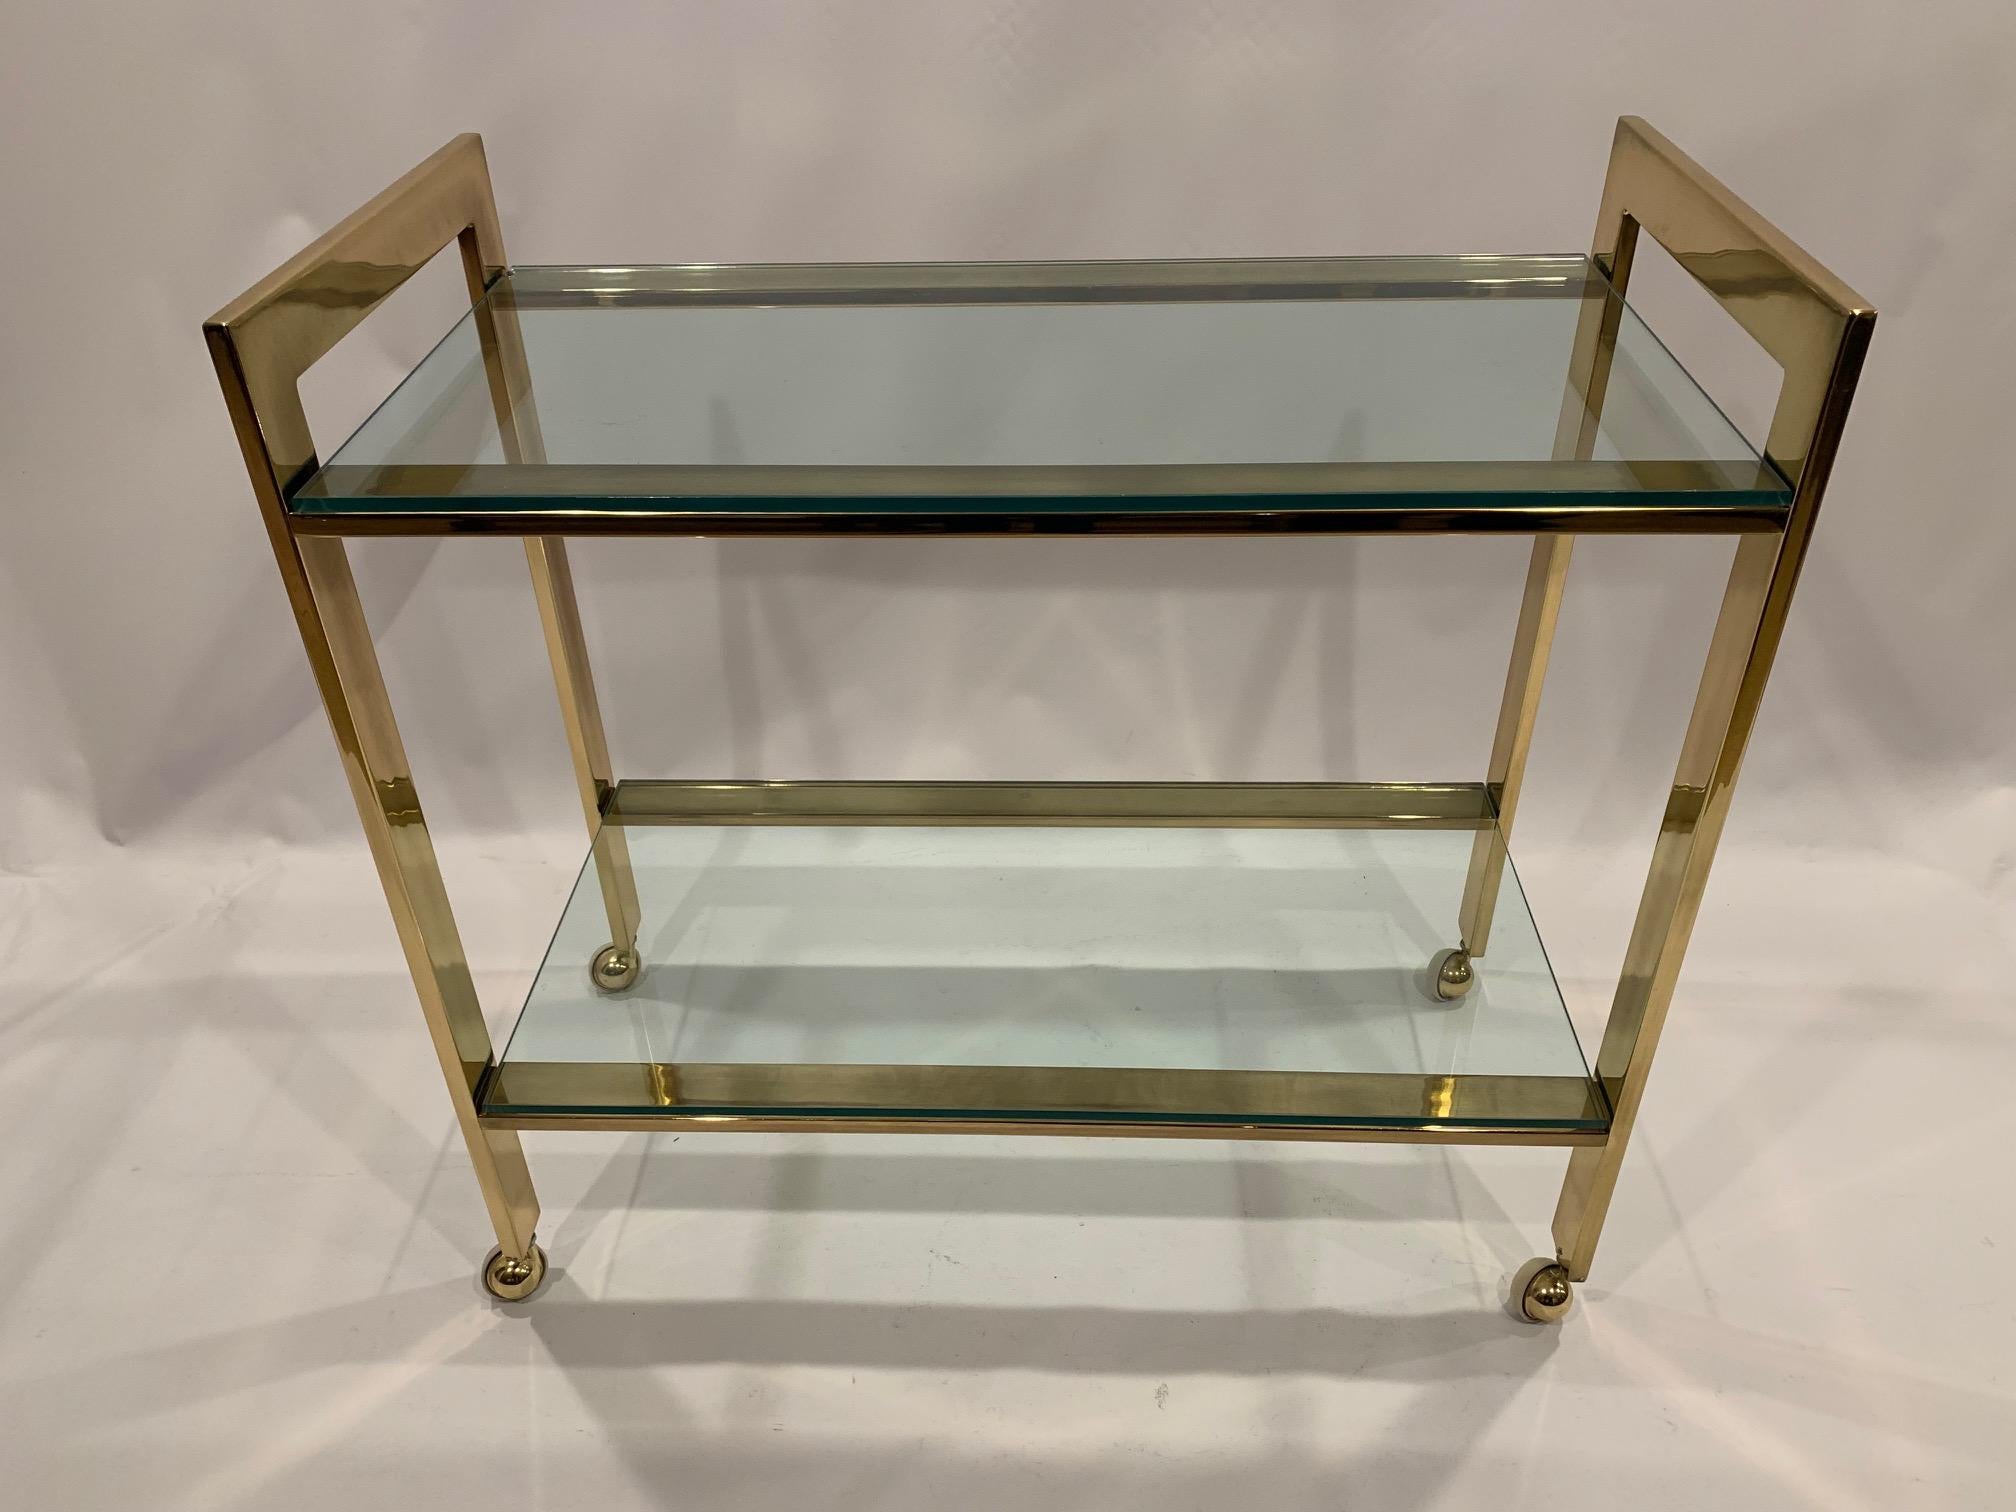 Classic Mid-Century Modern brass and glass Mastercraft bar cart having two tiers and smoothly functioning casters.